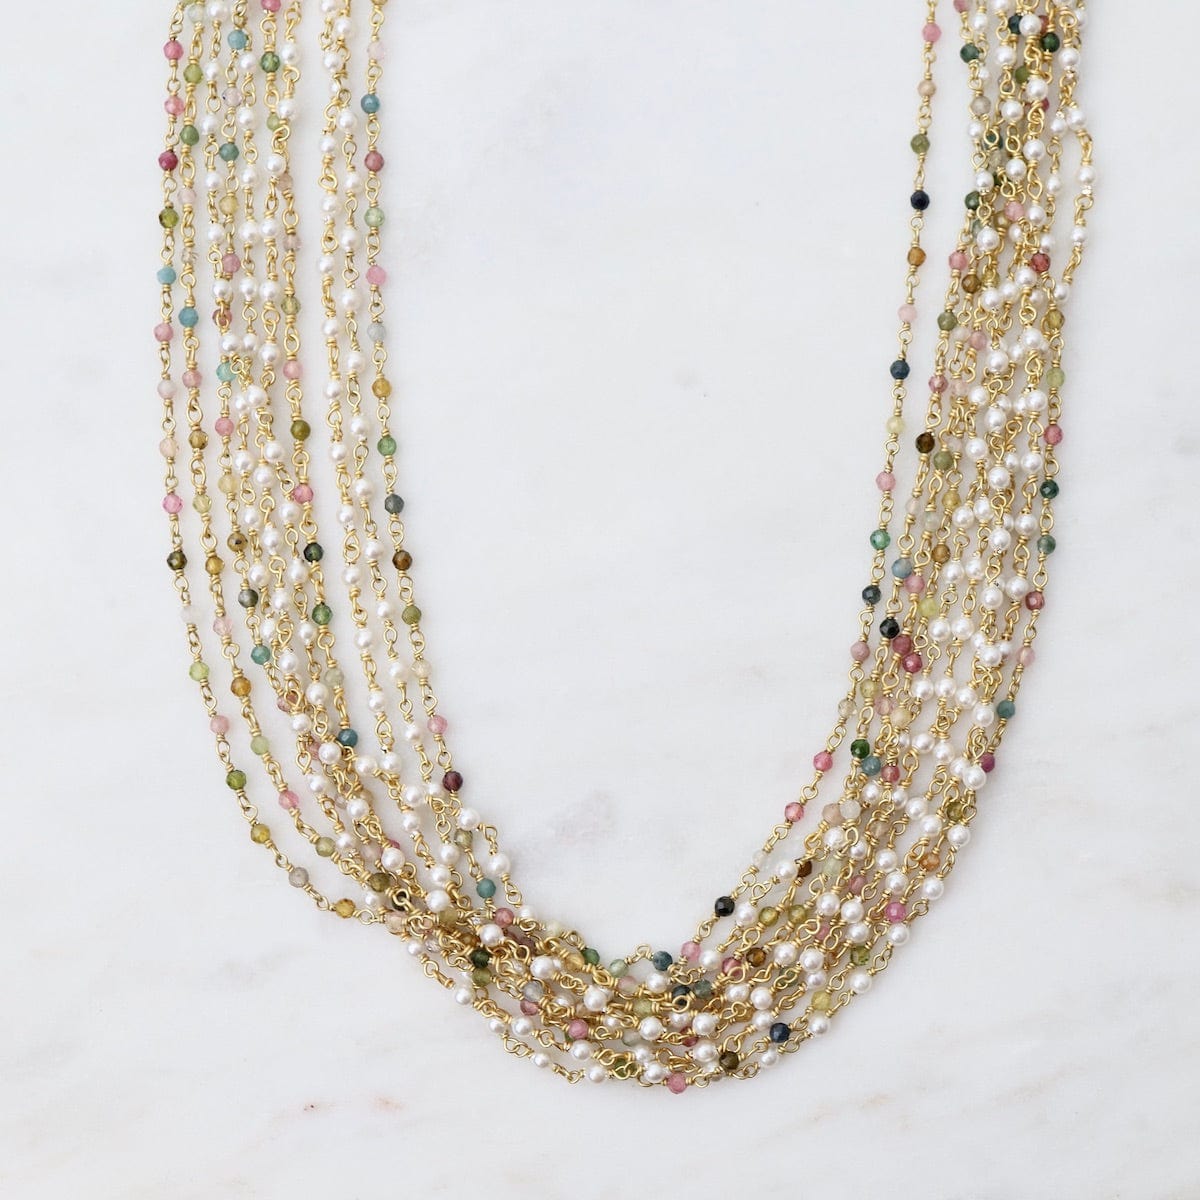 NKL-GPL Ten Strings of Pearl and Multi Tourmaline Necklace